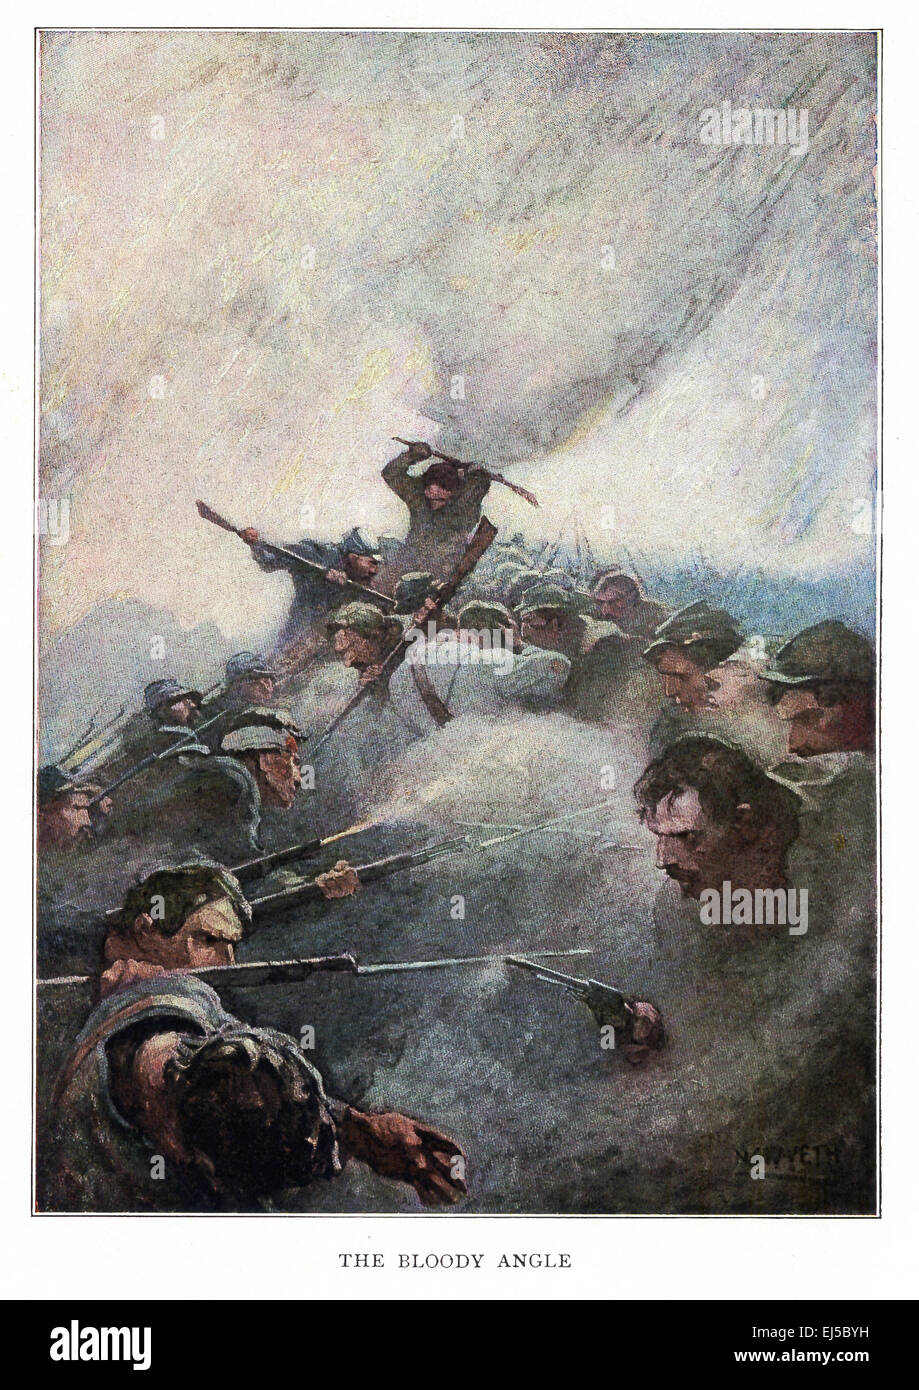 This illustration titled The Bloody Angle is from Mary Johnston's 1912 novel titled Cease Firing, which was illustrated by American artist N.C. Wyeth. Bloody Angle was part of the Battle of Spotsylvania Court House fought in Virginia in May 1864, during the American Civil War.  Ulysses Grant tried to break through the Confederate line, but was unable - there was no winner and the casualties were very high. Stock Photo